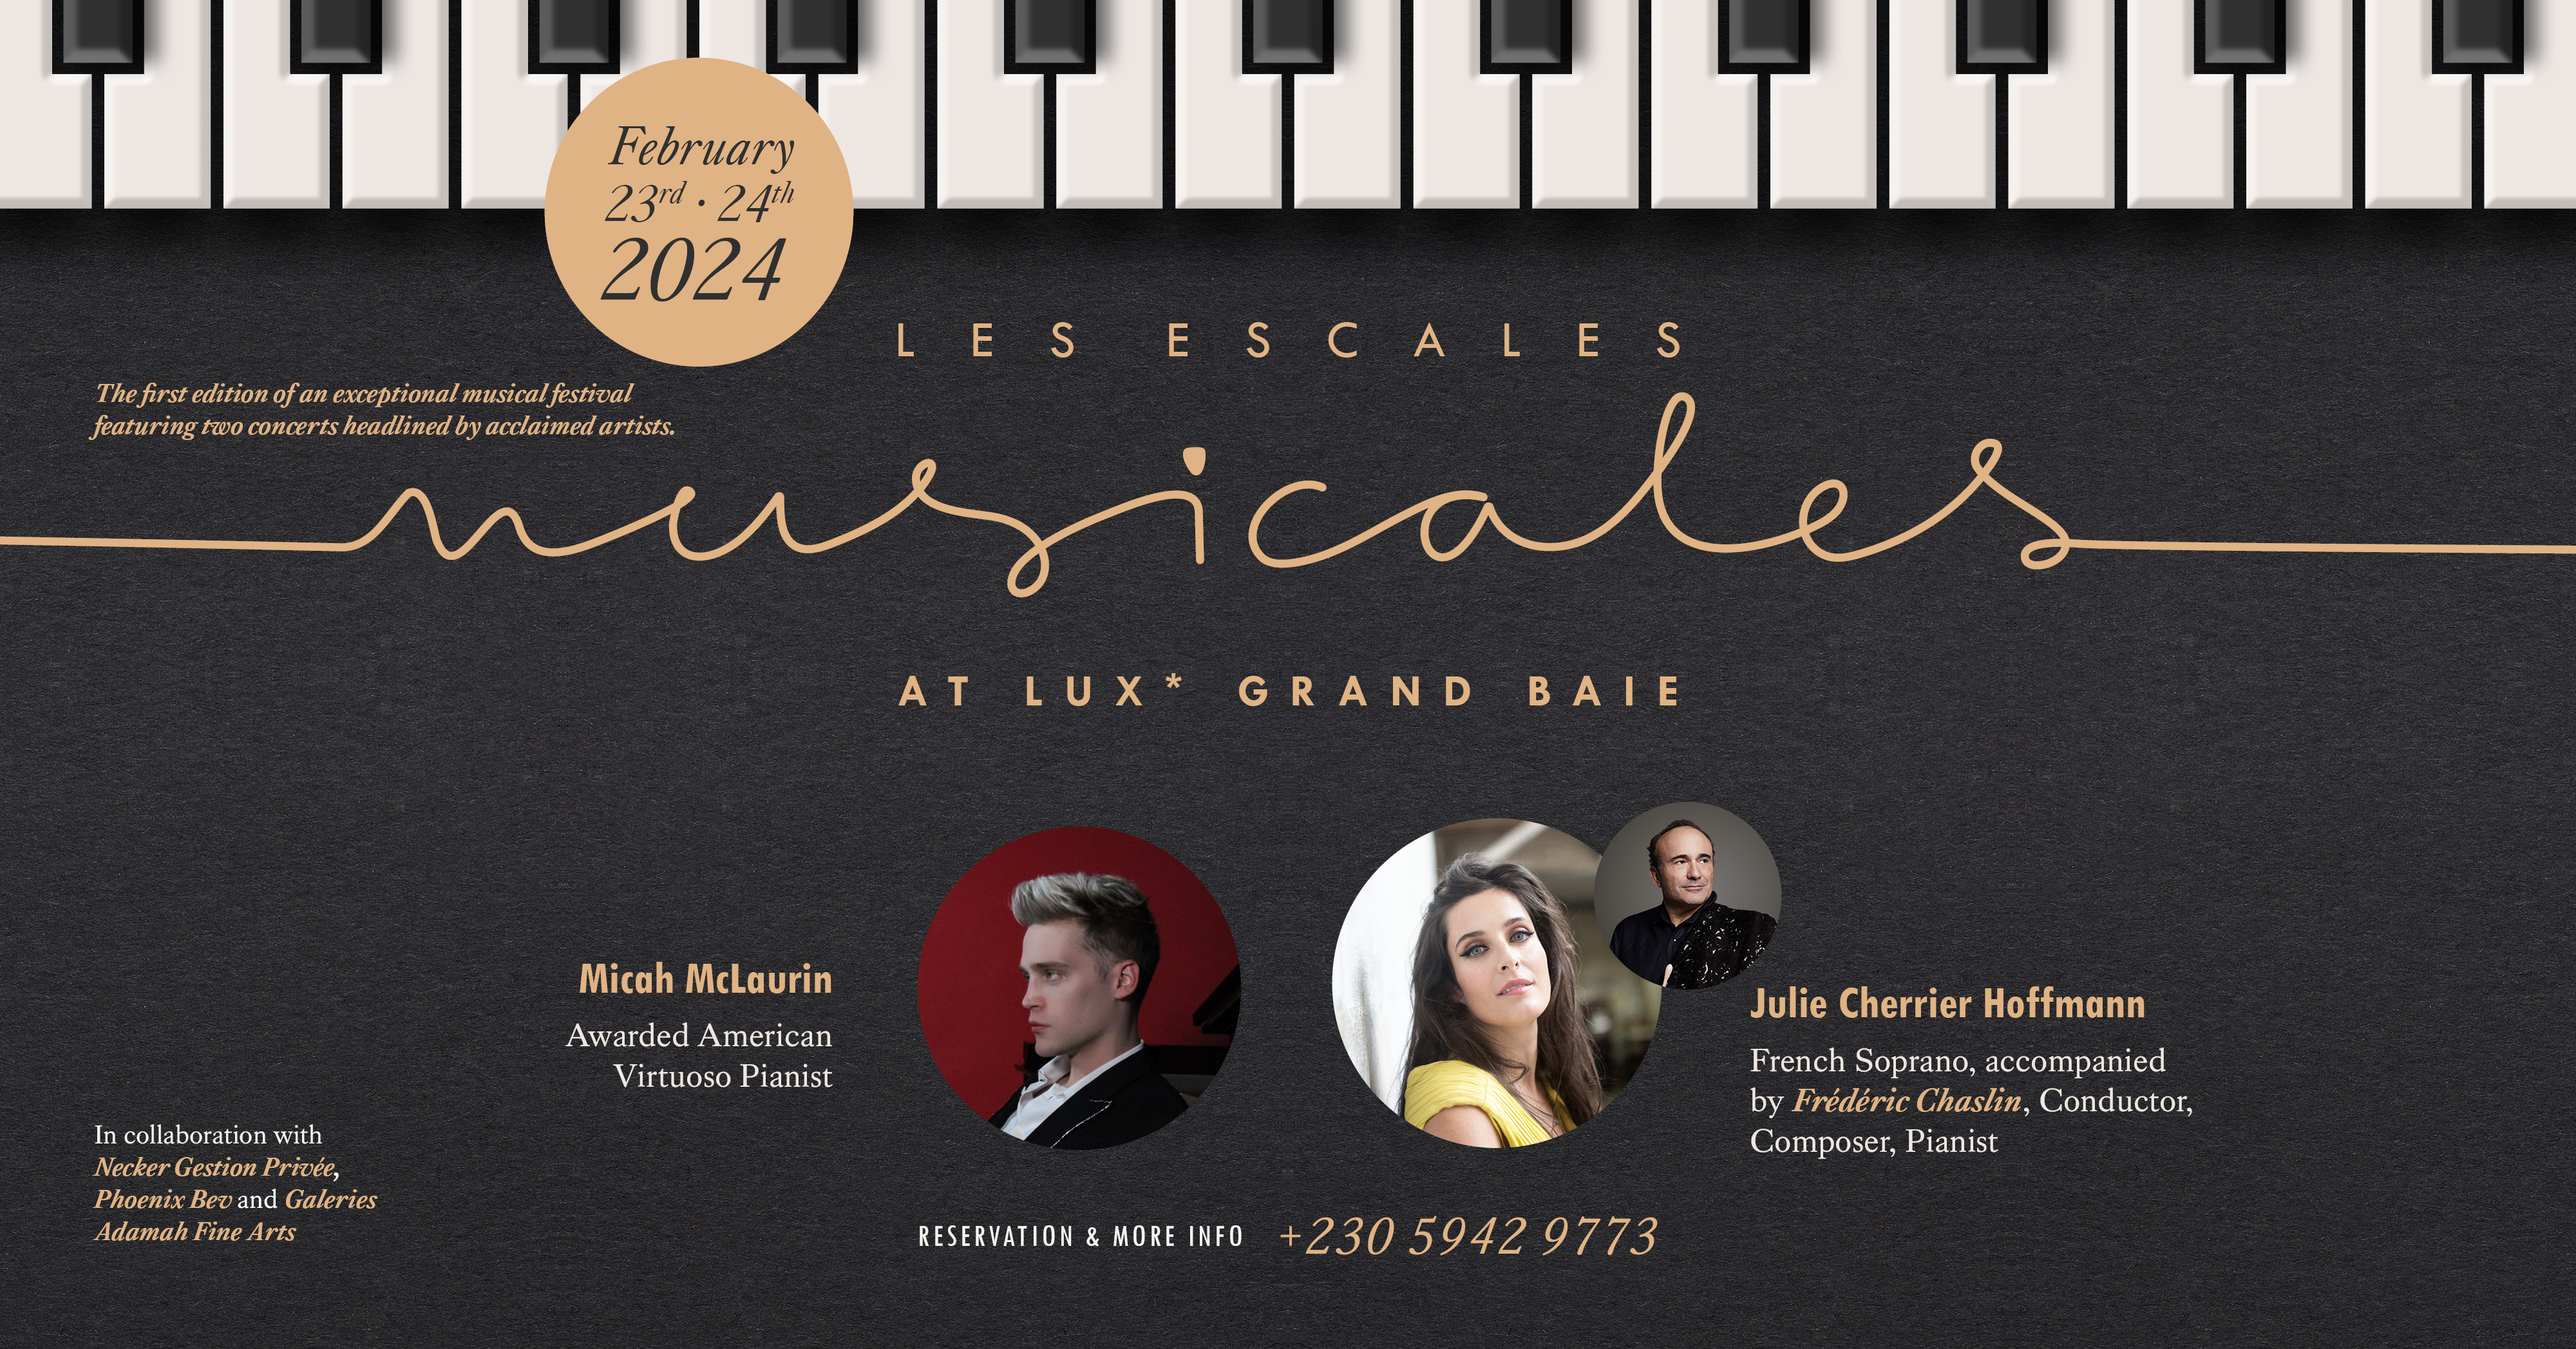 LUX<bdi>*</bdi> Grand Baie hits 2024 with its first music festival